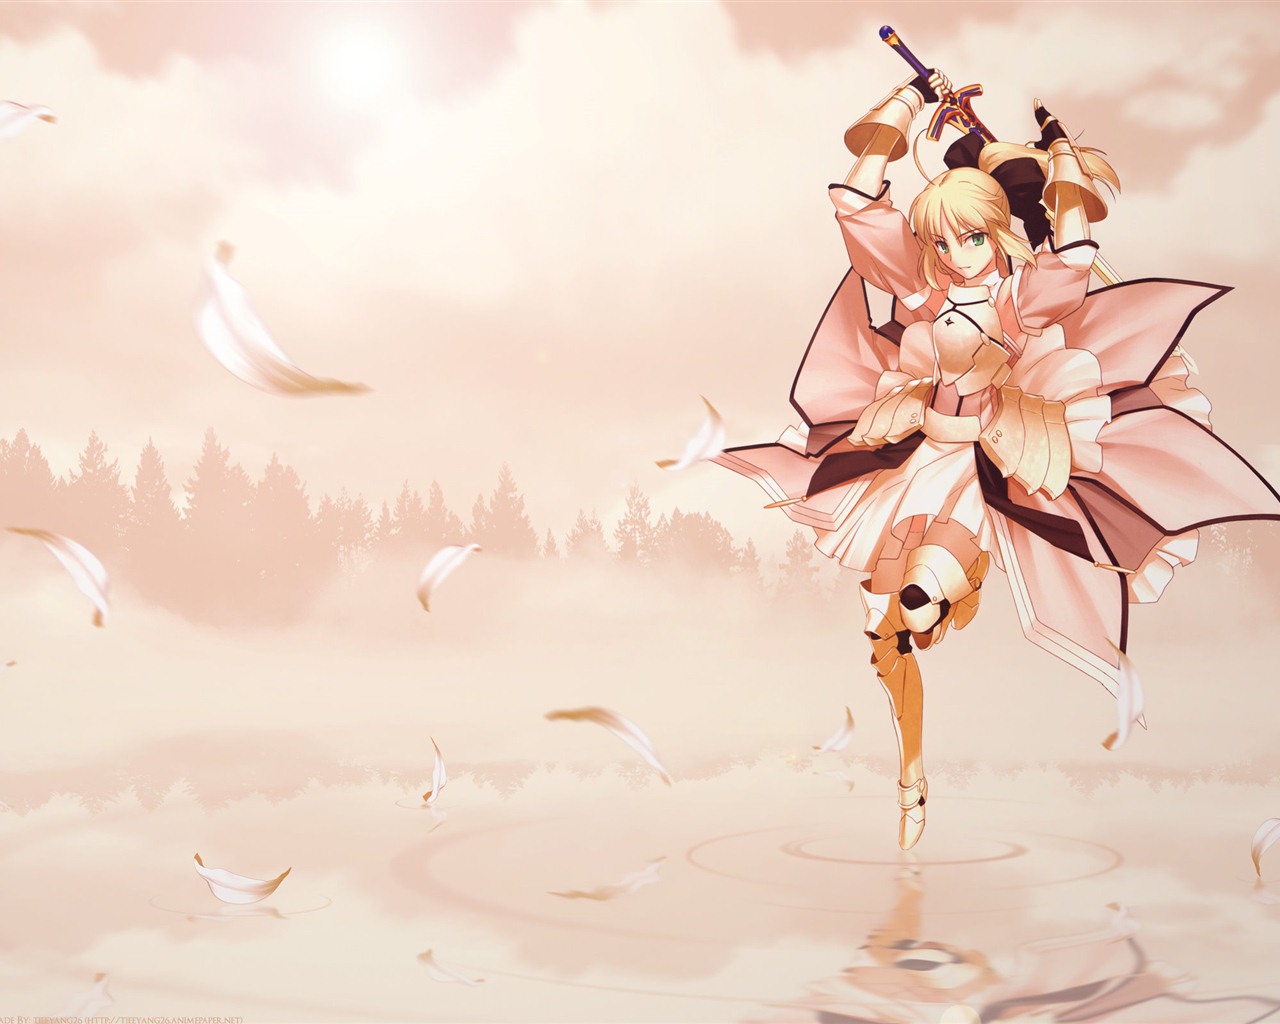 Fate stay night HD wallpapers #17 - 1280x1024